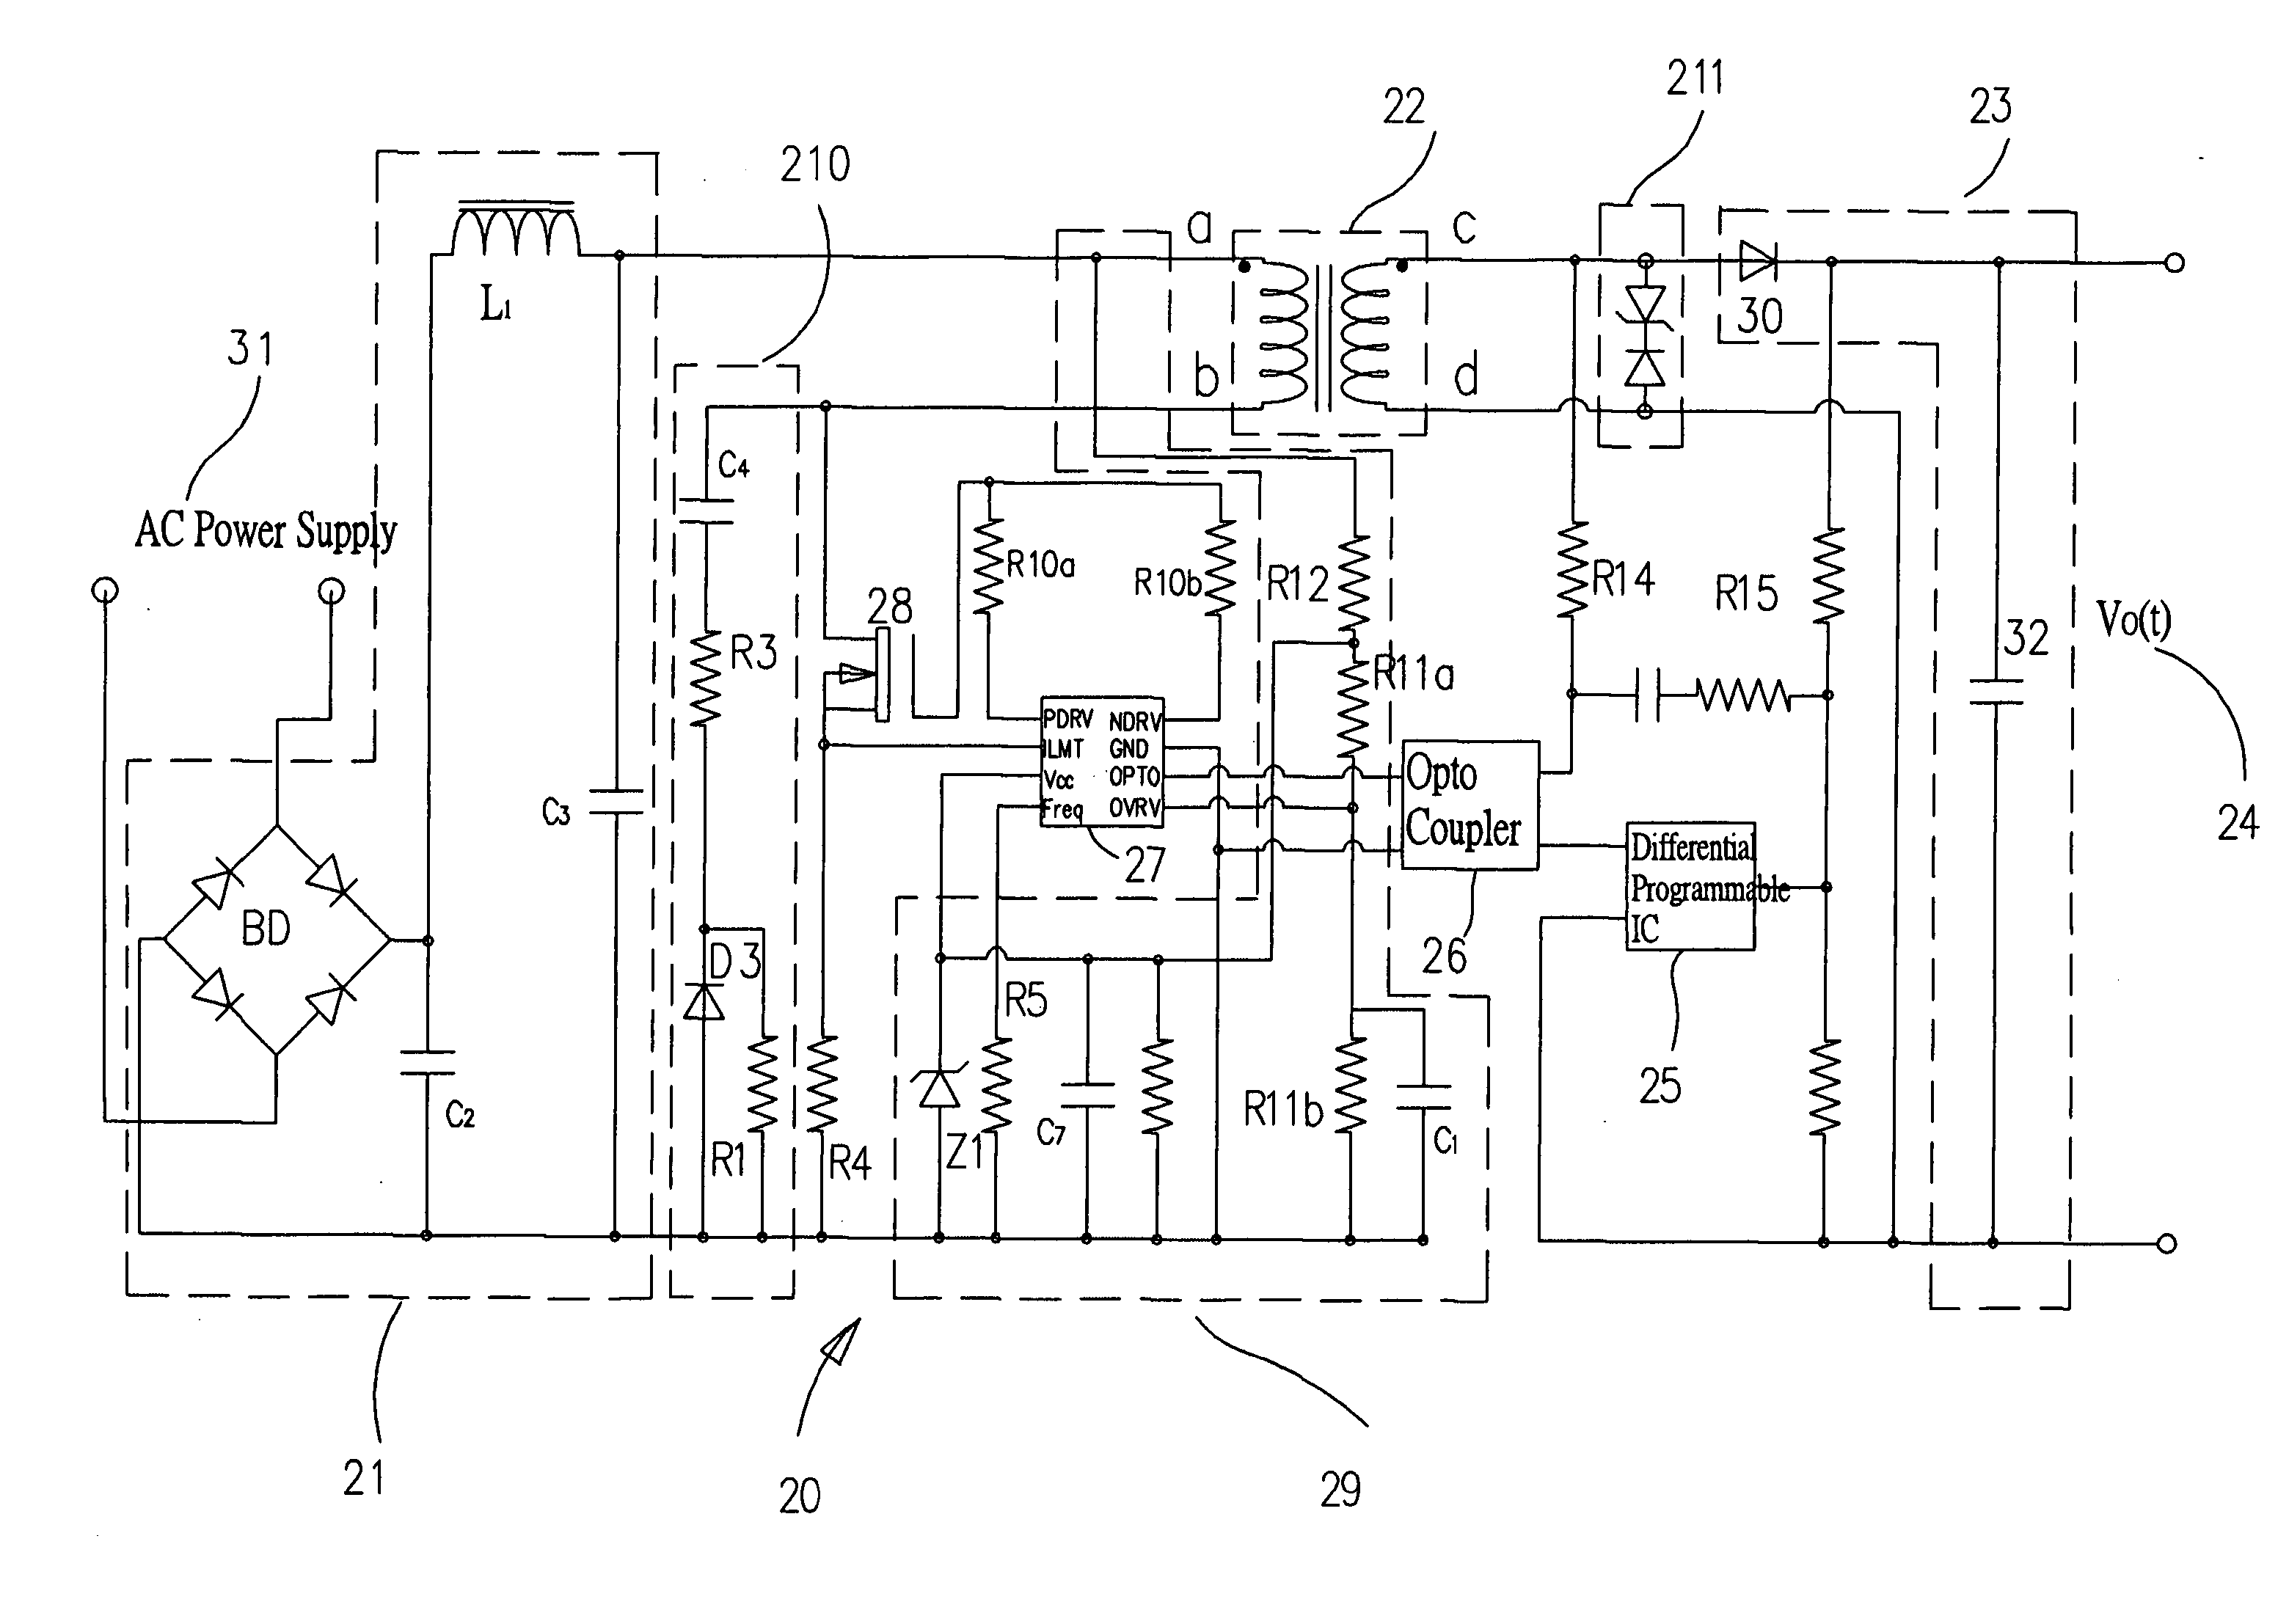 Power supply device for out putting stable programmable power supply